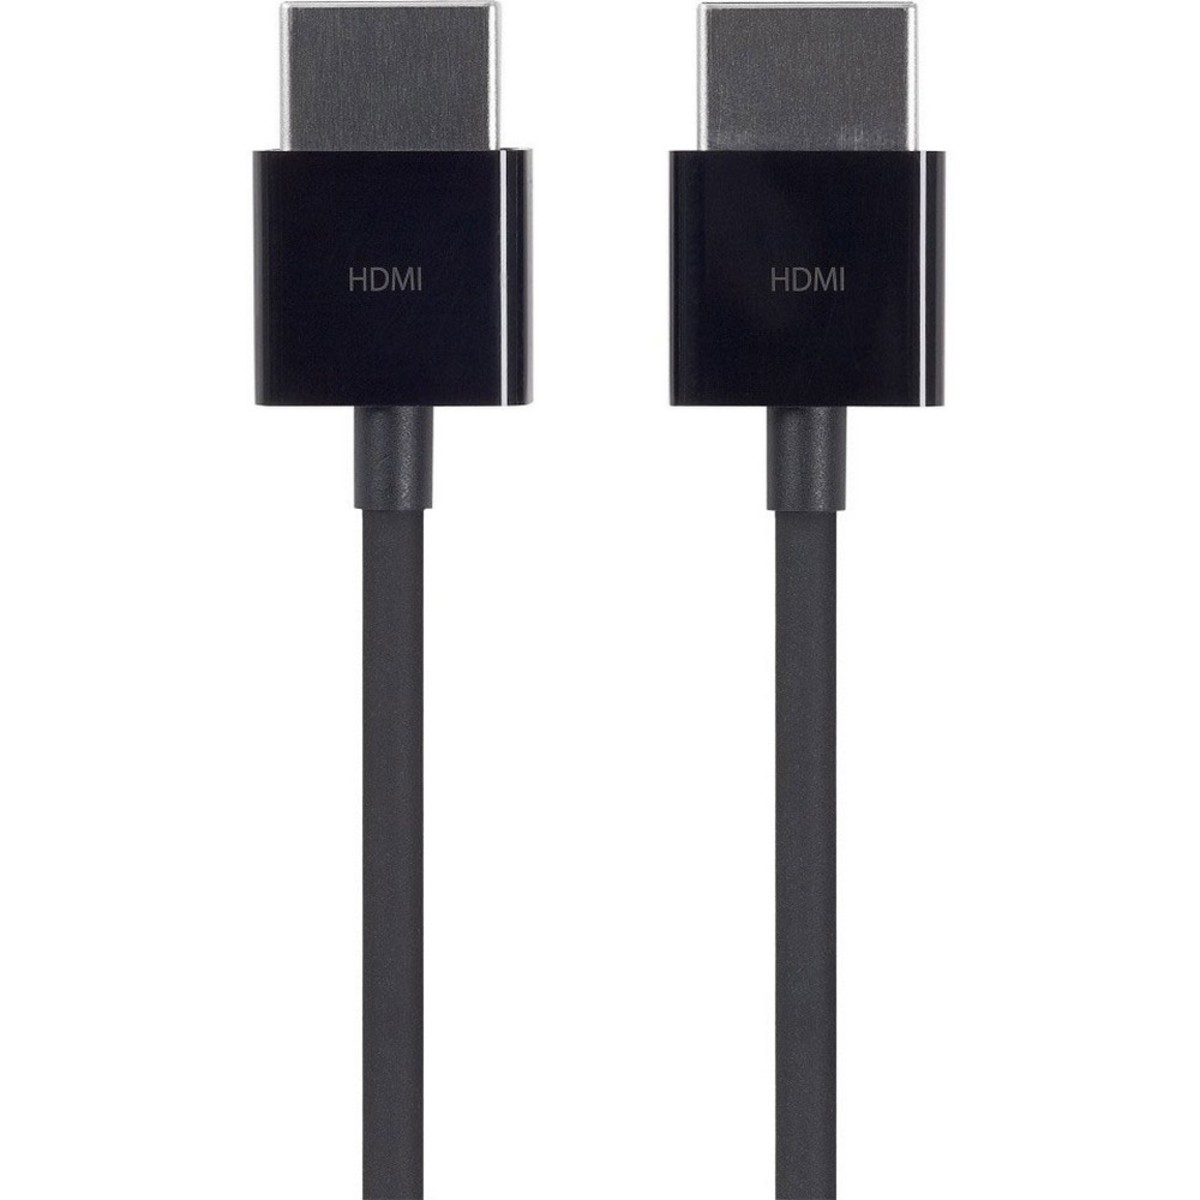 Apple HDMI to HDMI Cable MC838ZM/A